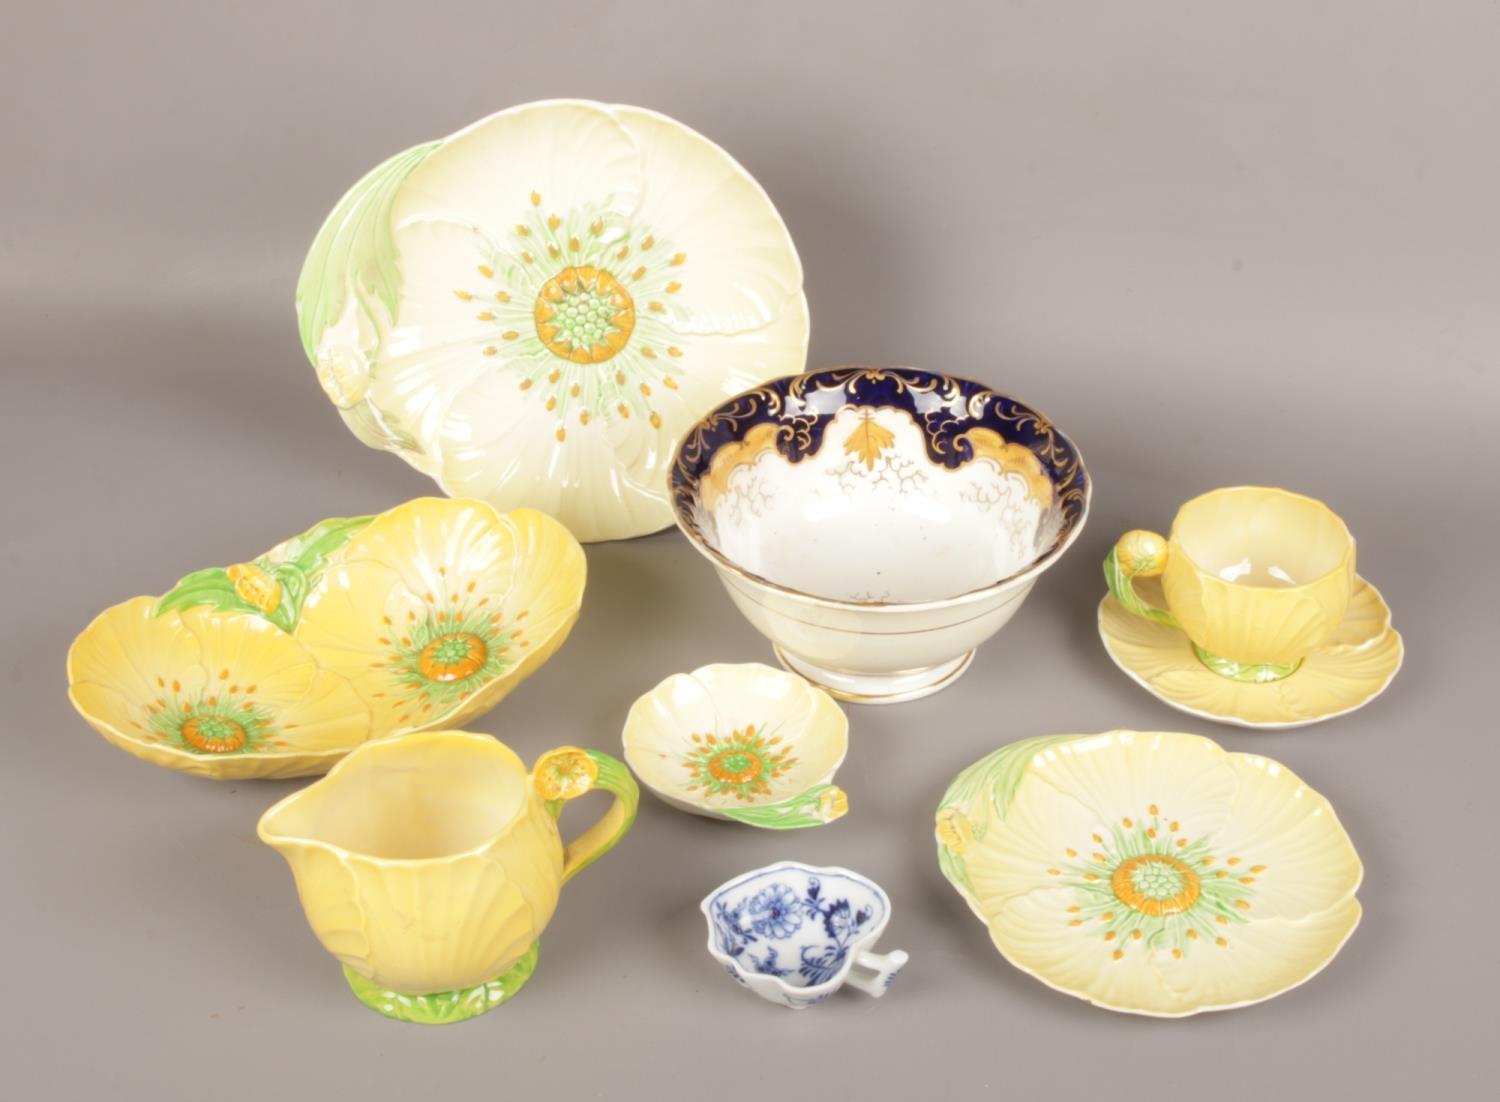 A quantity of Carltonware moulded in the yellow poppy design, an early 19th century Ridgway slop